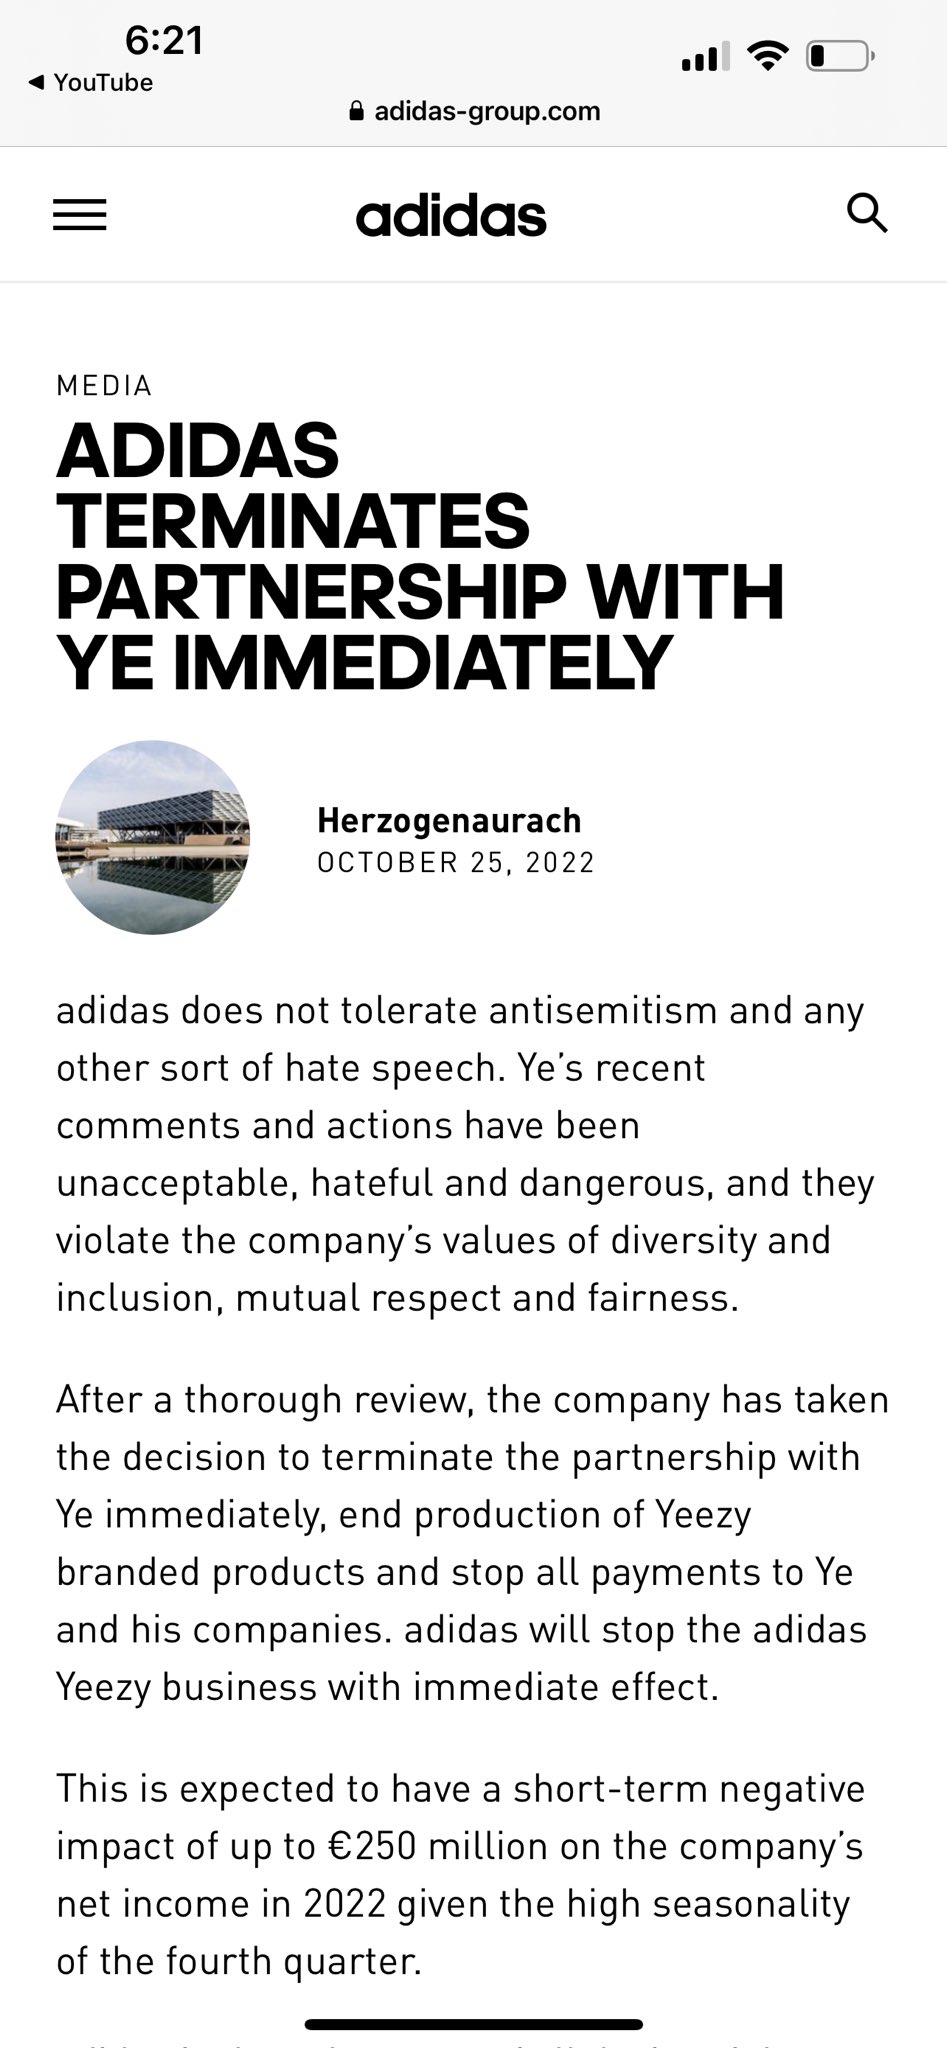 Jacques Slade Twitter: "It is official. Adidas ends relationship with Kanye West. https://t.co/xz4lznnY8p https://t.co/YvB5QH4M6L" Twitter